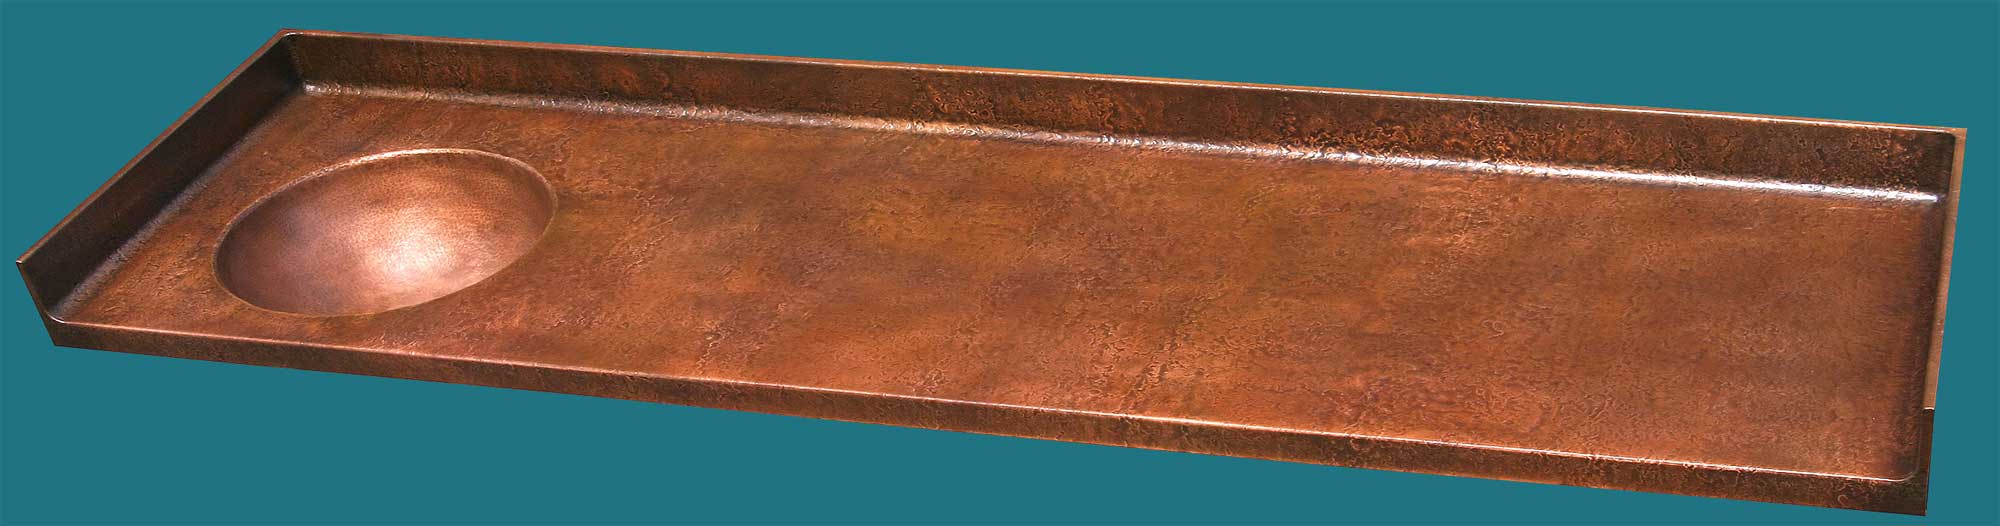 Handcrafted Metal Copper Countertops And Integral Copper Sinks